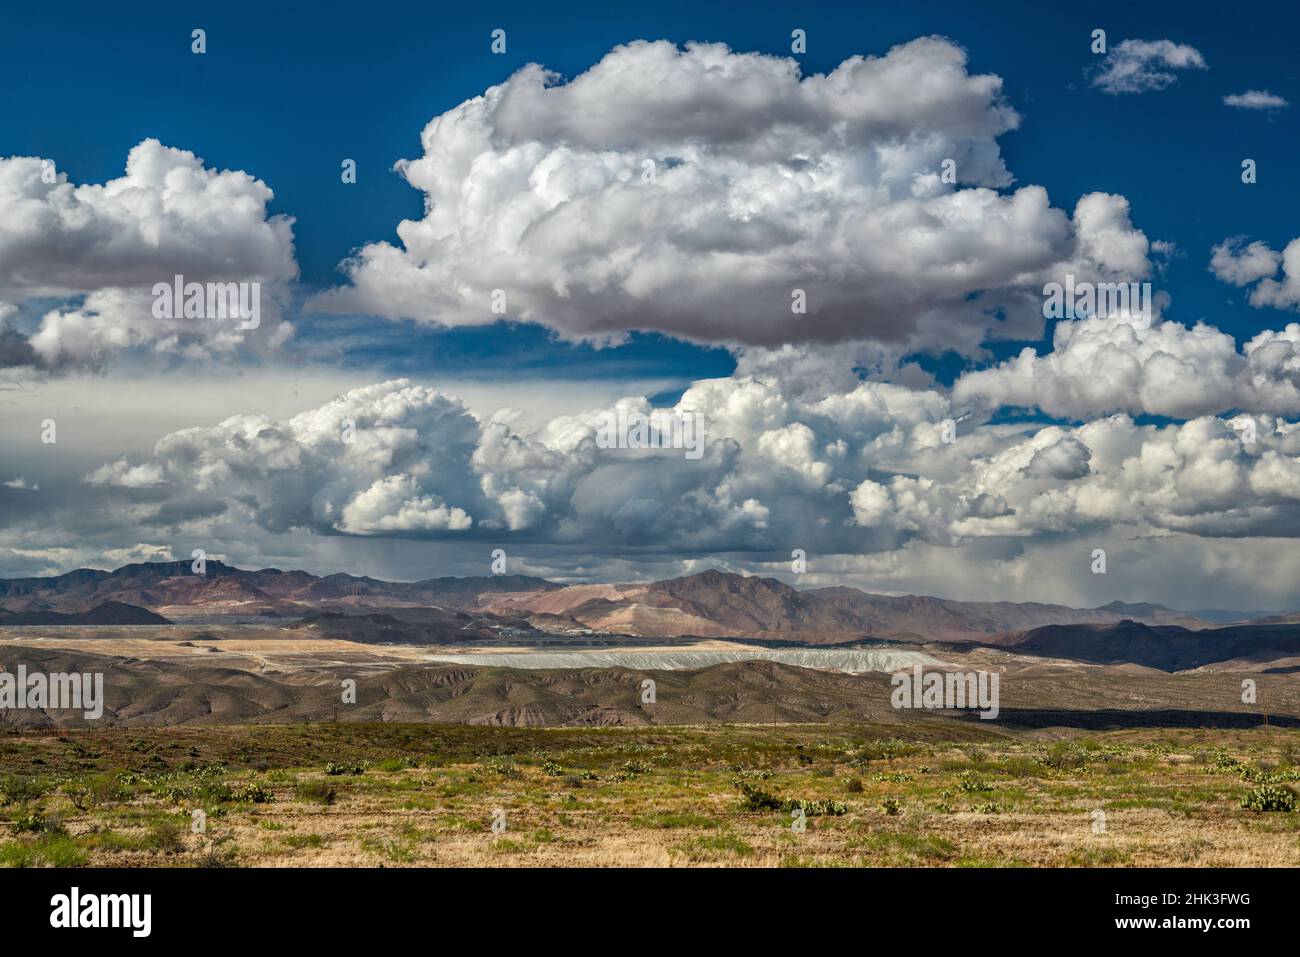 Towering cumulus clouds, rain over Morenci copper mine in far dist 8 m N, White Mountains behind, view from Black Hills, near Clifton, Arizona, USA Stock Photo